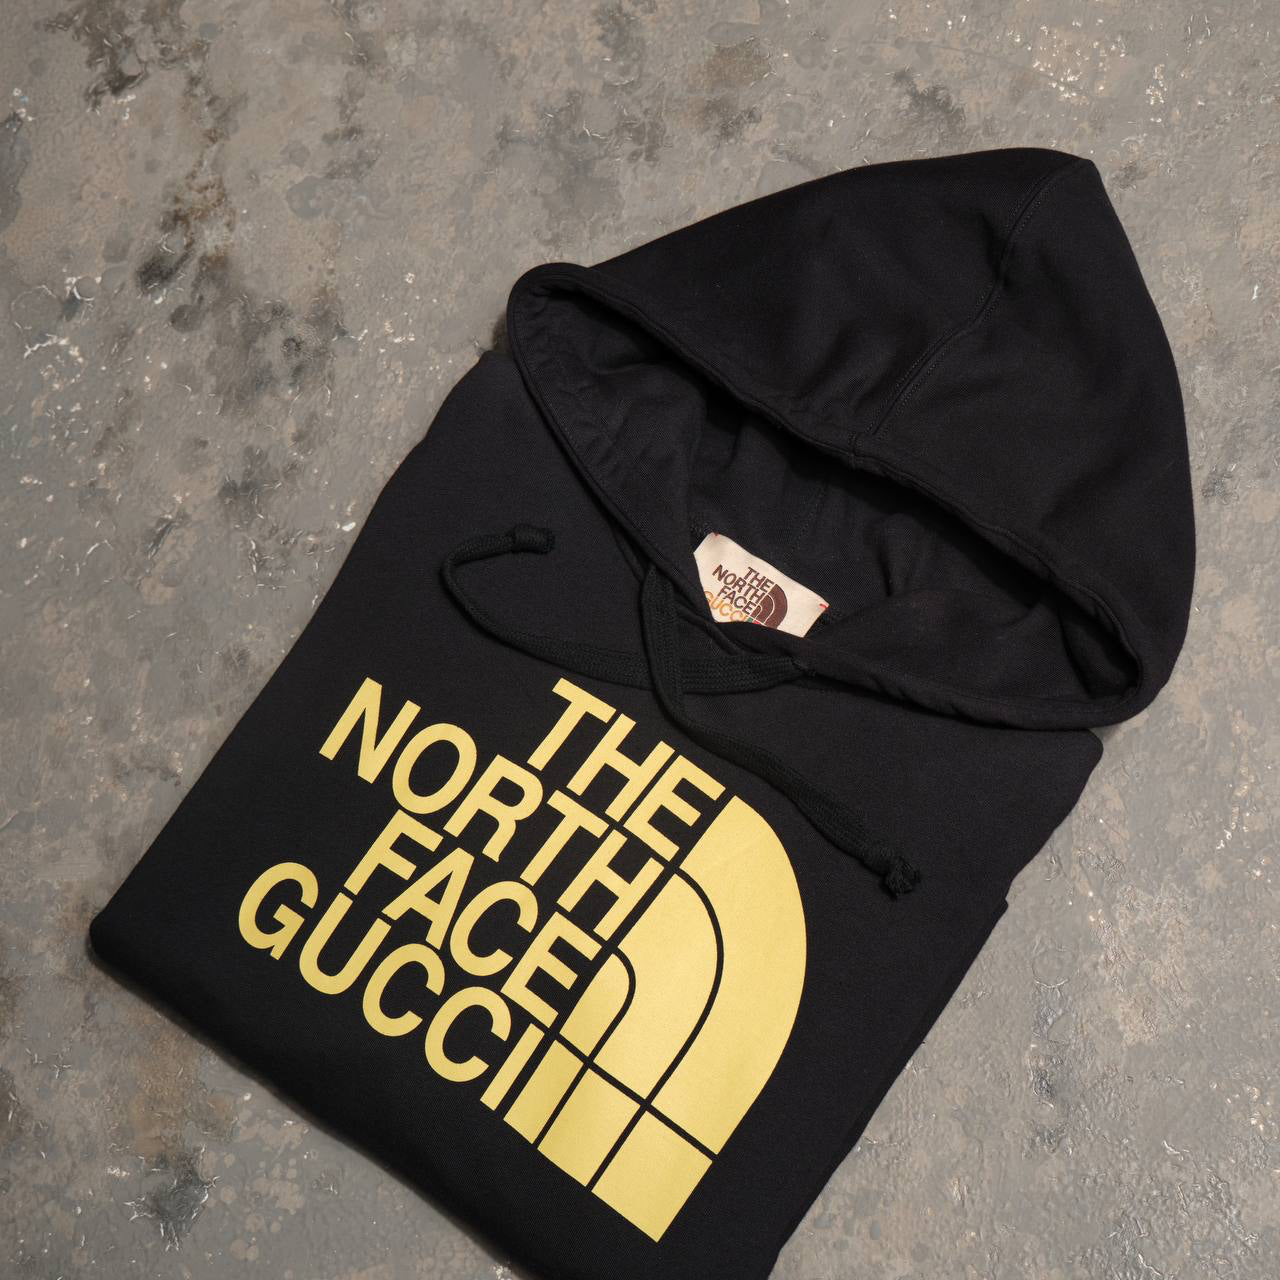 Gucci x The North Face Sweatshirt Forest Print